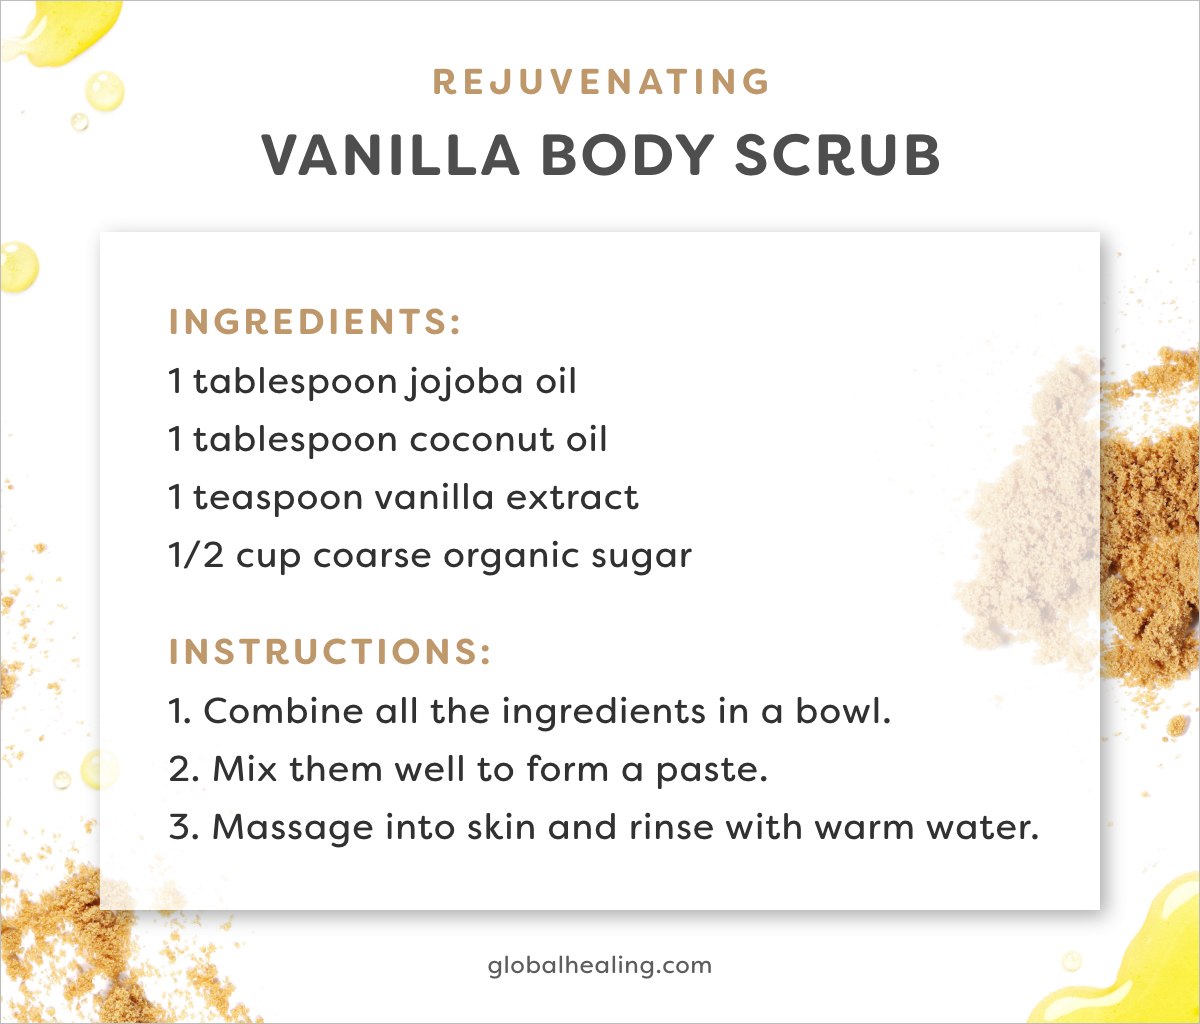 Try this rejuvenating vanilla body scrub that'll leave your skin feeling soft and moisturized.